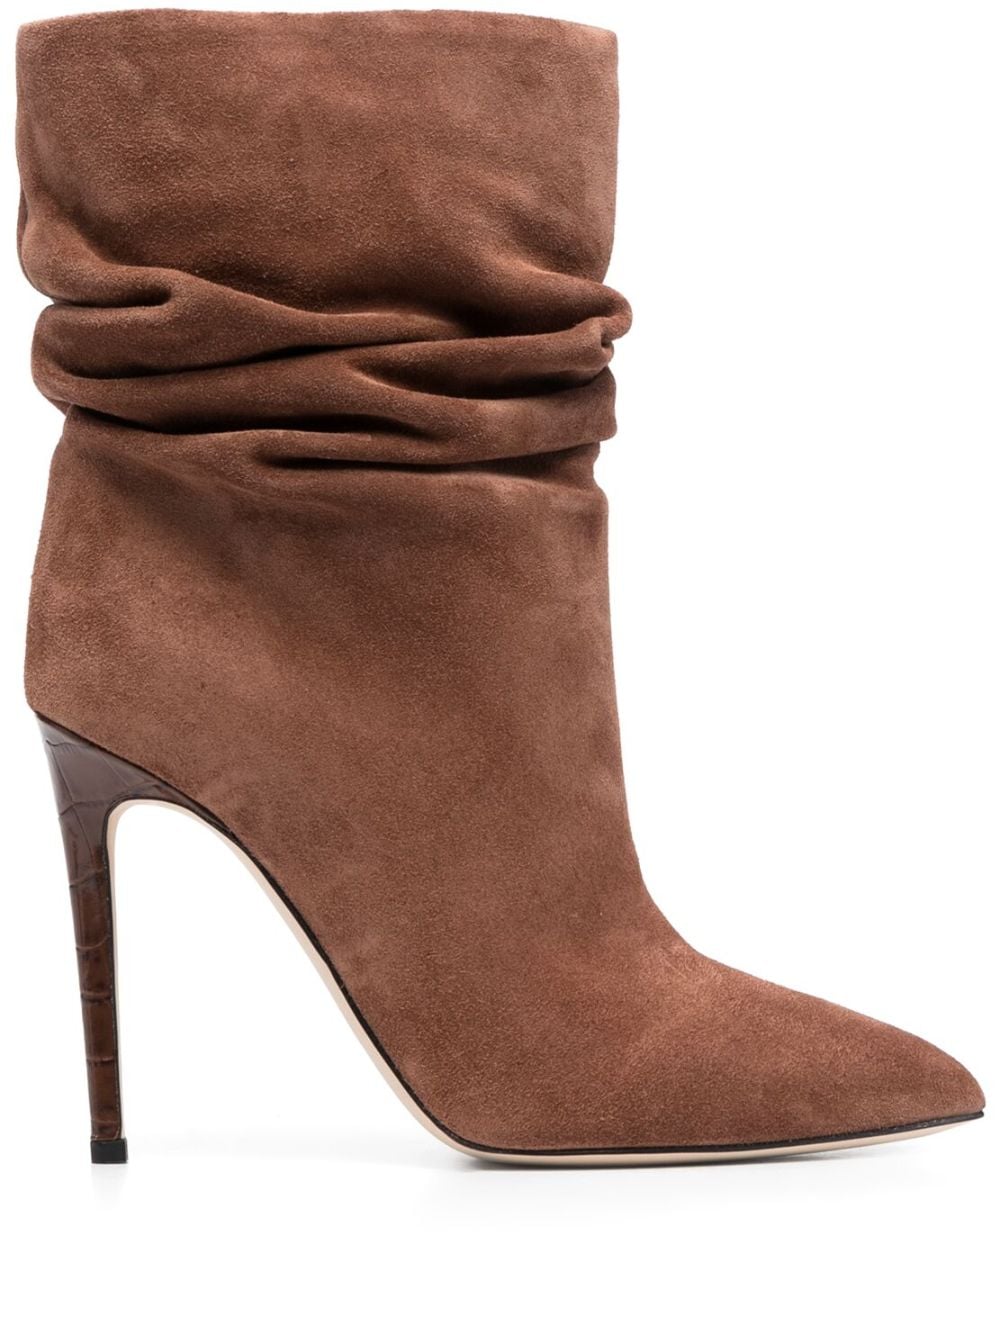 PARIS TEXAS SLOUCHY 120MM SUEDE BOOTS